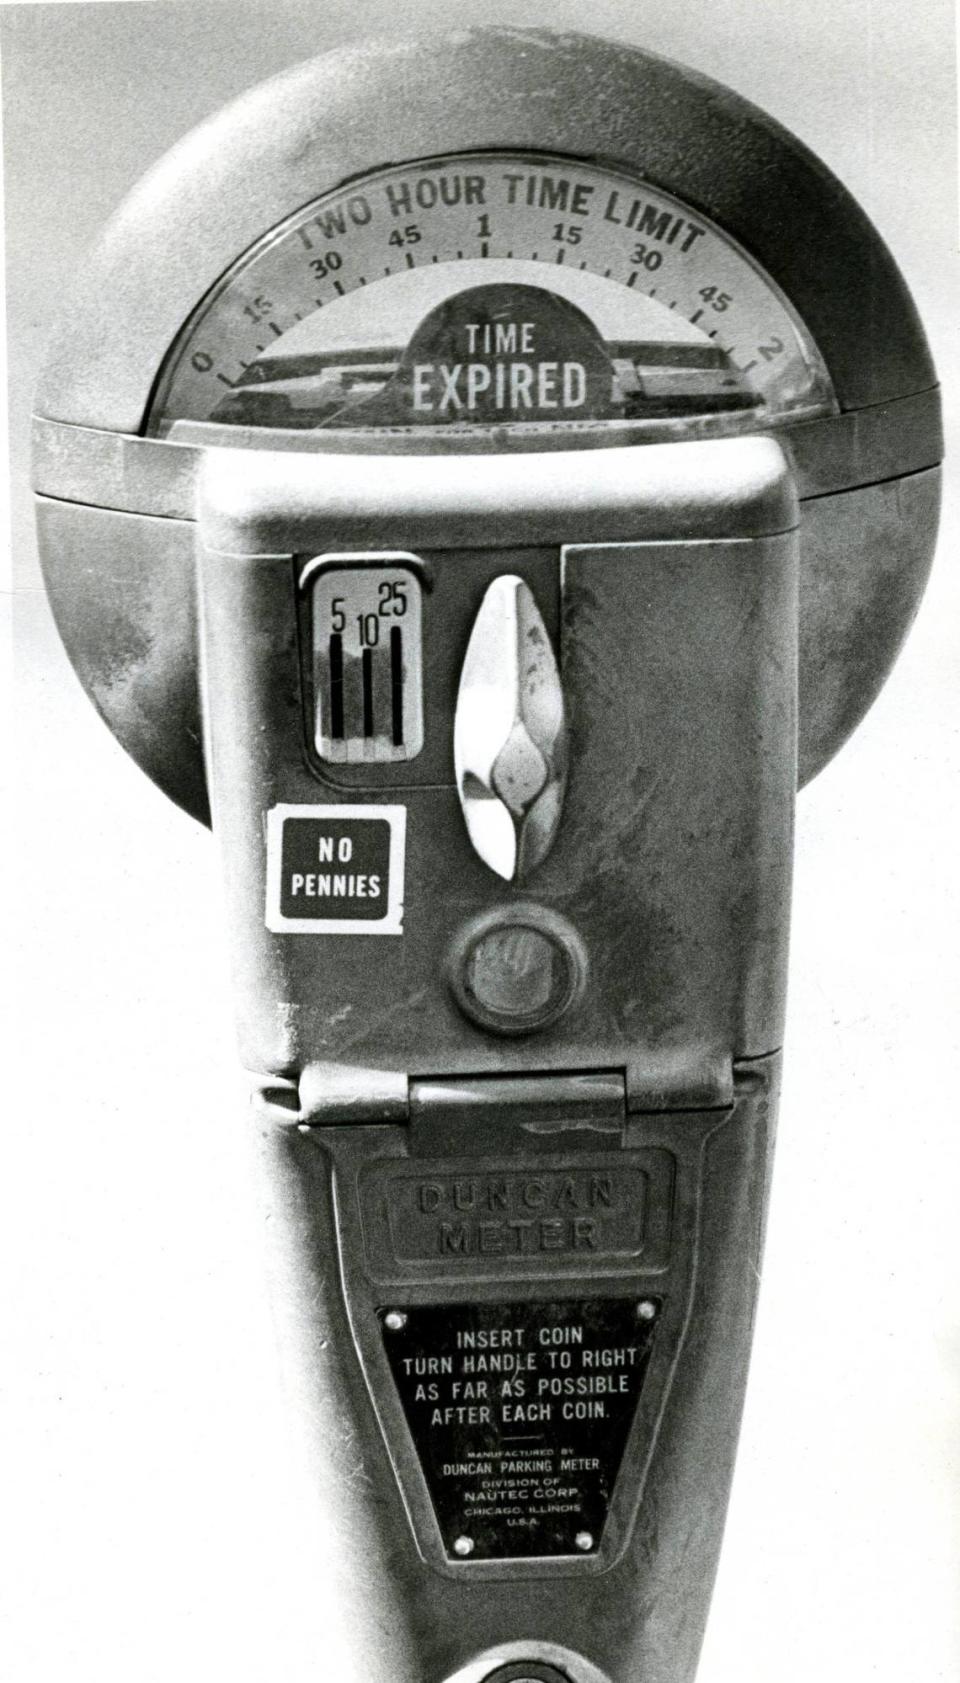 Duncan parking meter reads time expired in San Luis Obispo Aufust 6, 1986.